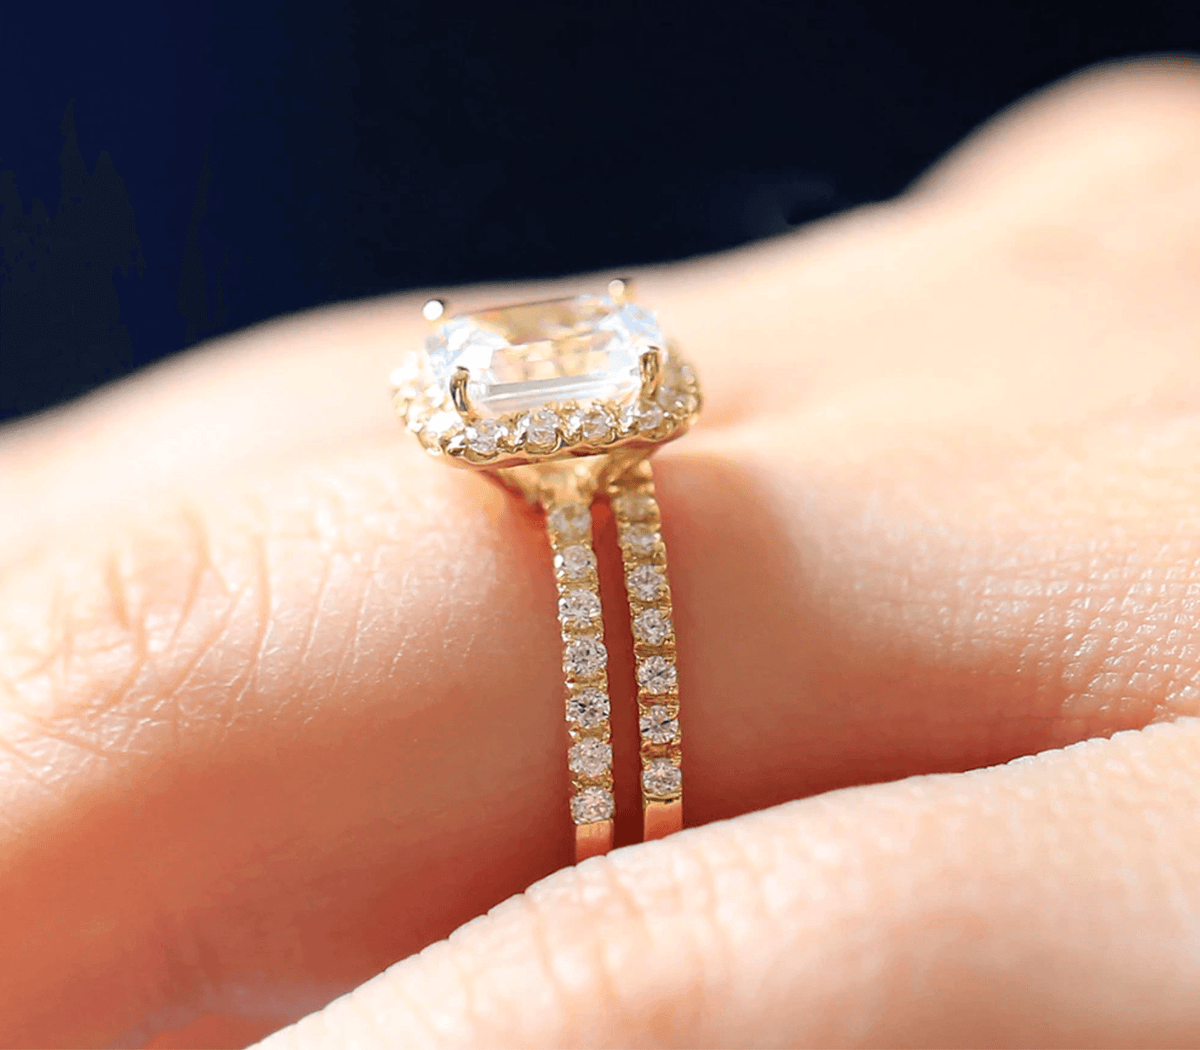 Diamond Engagement Ring Set with Emerald Cut Stone and Matching Band